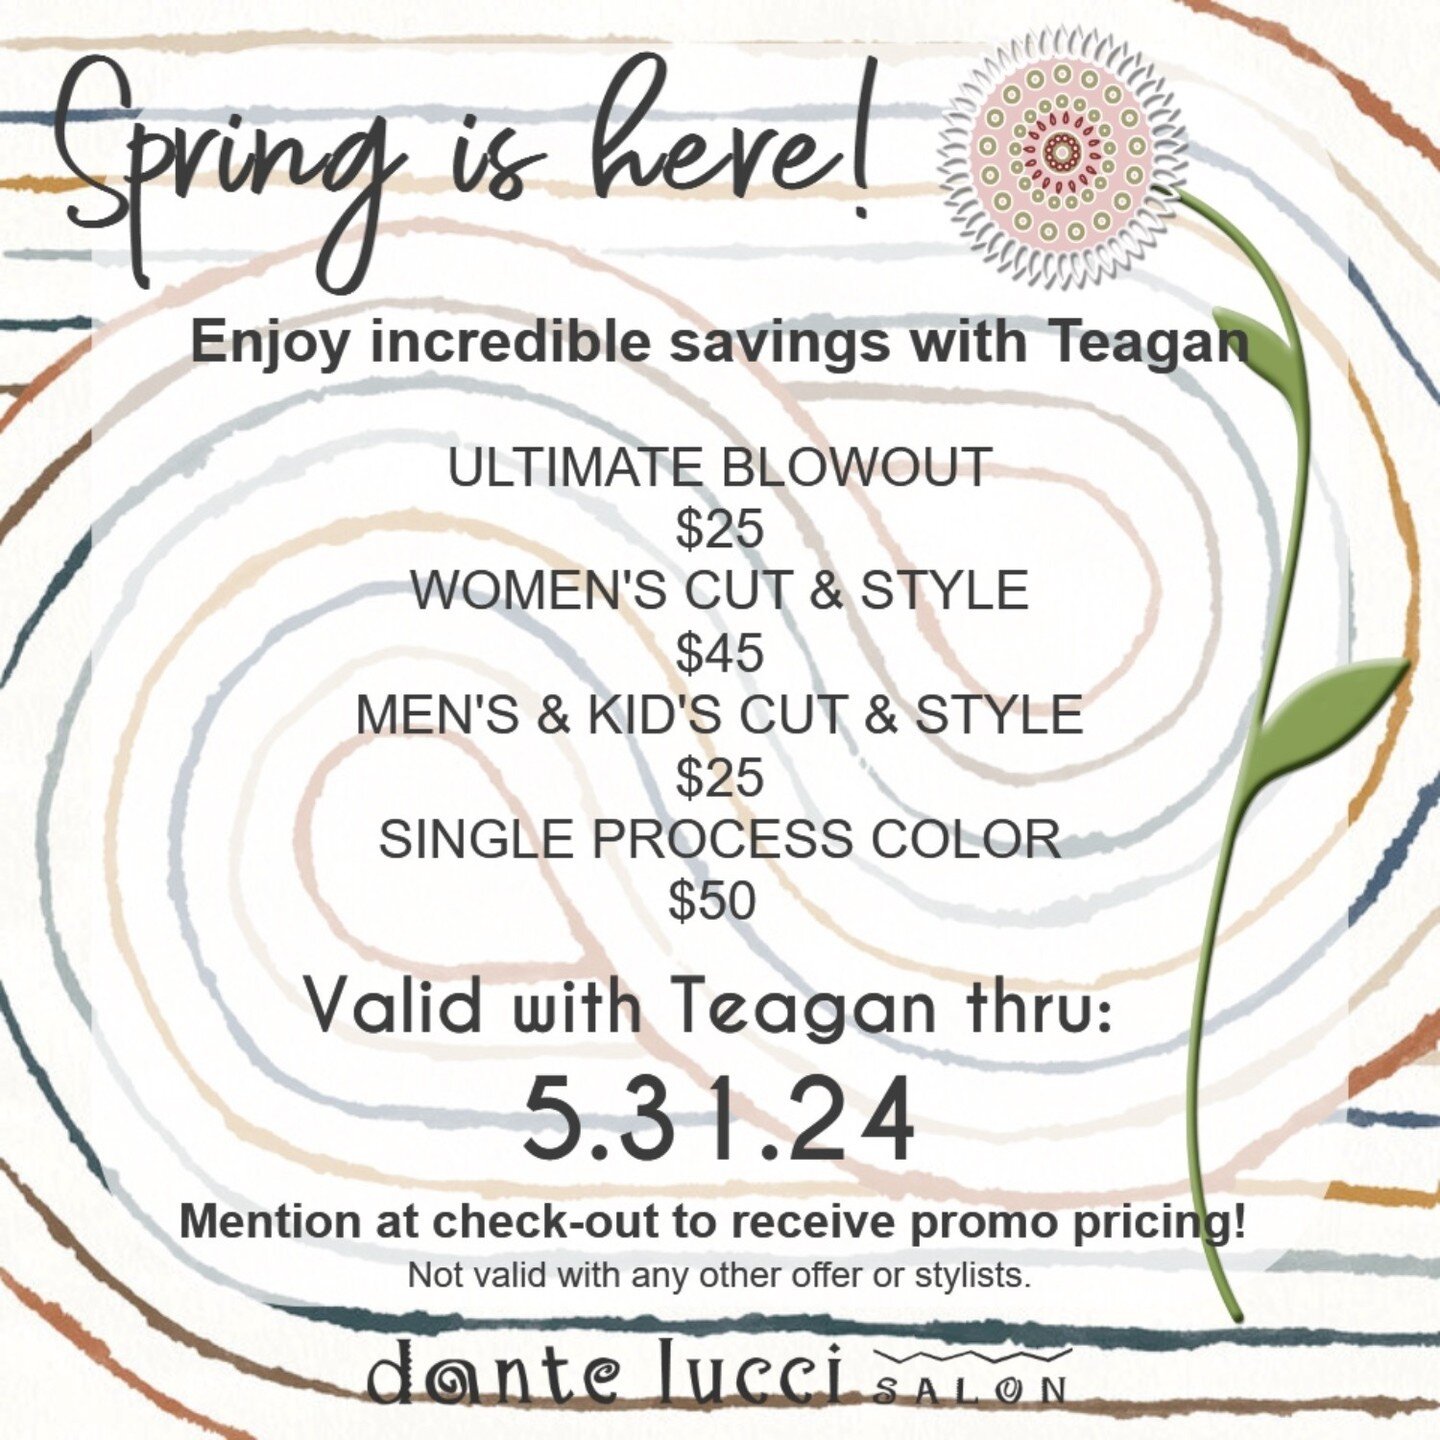 We are covering all the bases with these incredible savings with Teagan.  Give us a call to schedule, we will gladly assist you in arranging your appointment.  440-331-7222⁠
🌸⁠
.⁠
.⁠
.⁠
.⁠
.⁠
.⁠
⁠
#rockyriver #fairviewpark #lakewood #bayvillage #avo